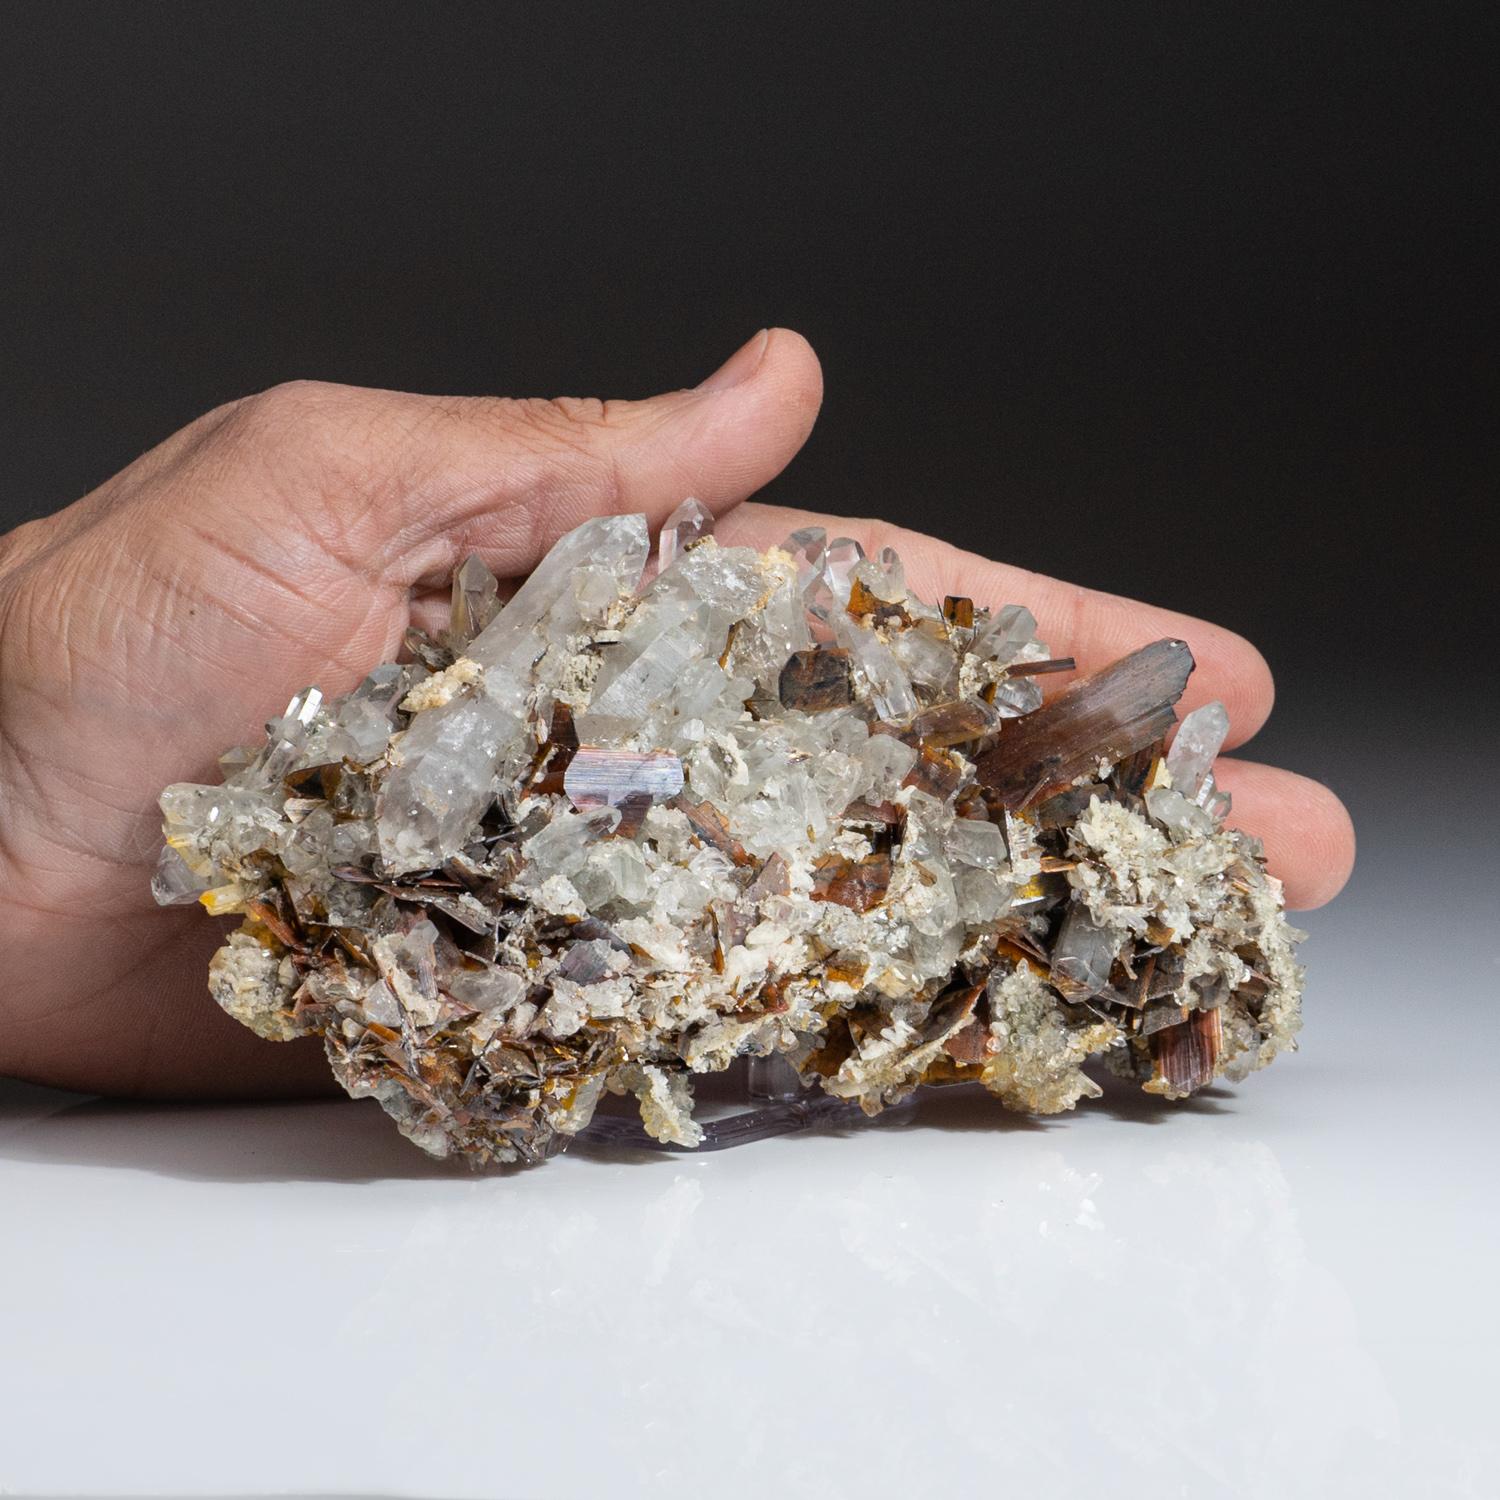 From Kharan District, Baluchistan, Pakistan

Complex crystal cluster of lustrous transparent quartz inter-grown with many thin bronze-colored brookite crystals up to 20mm. There is a large 21mm fully terminated brookite crystal centered in the